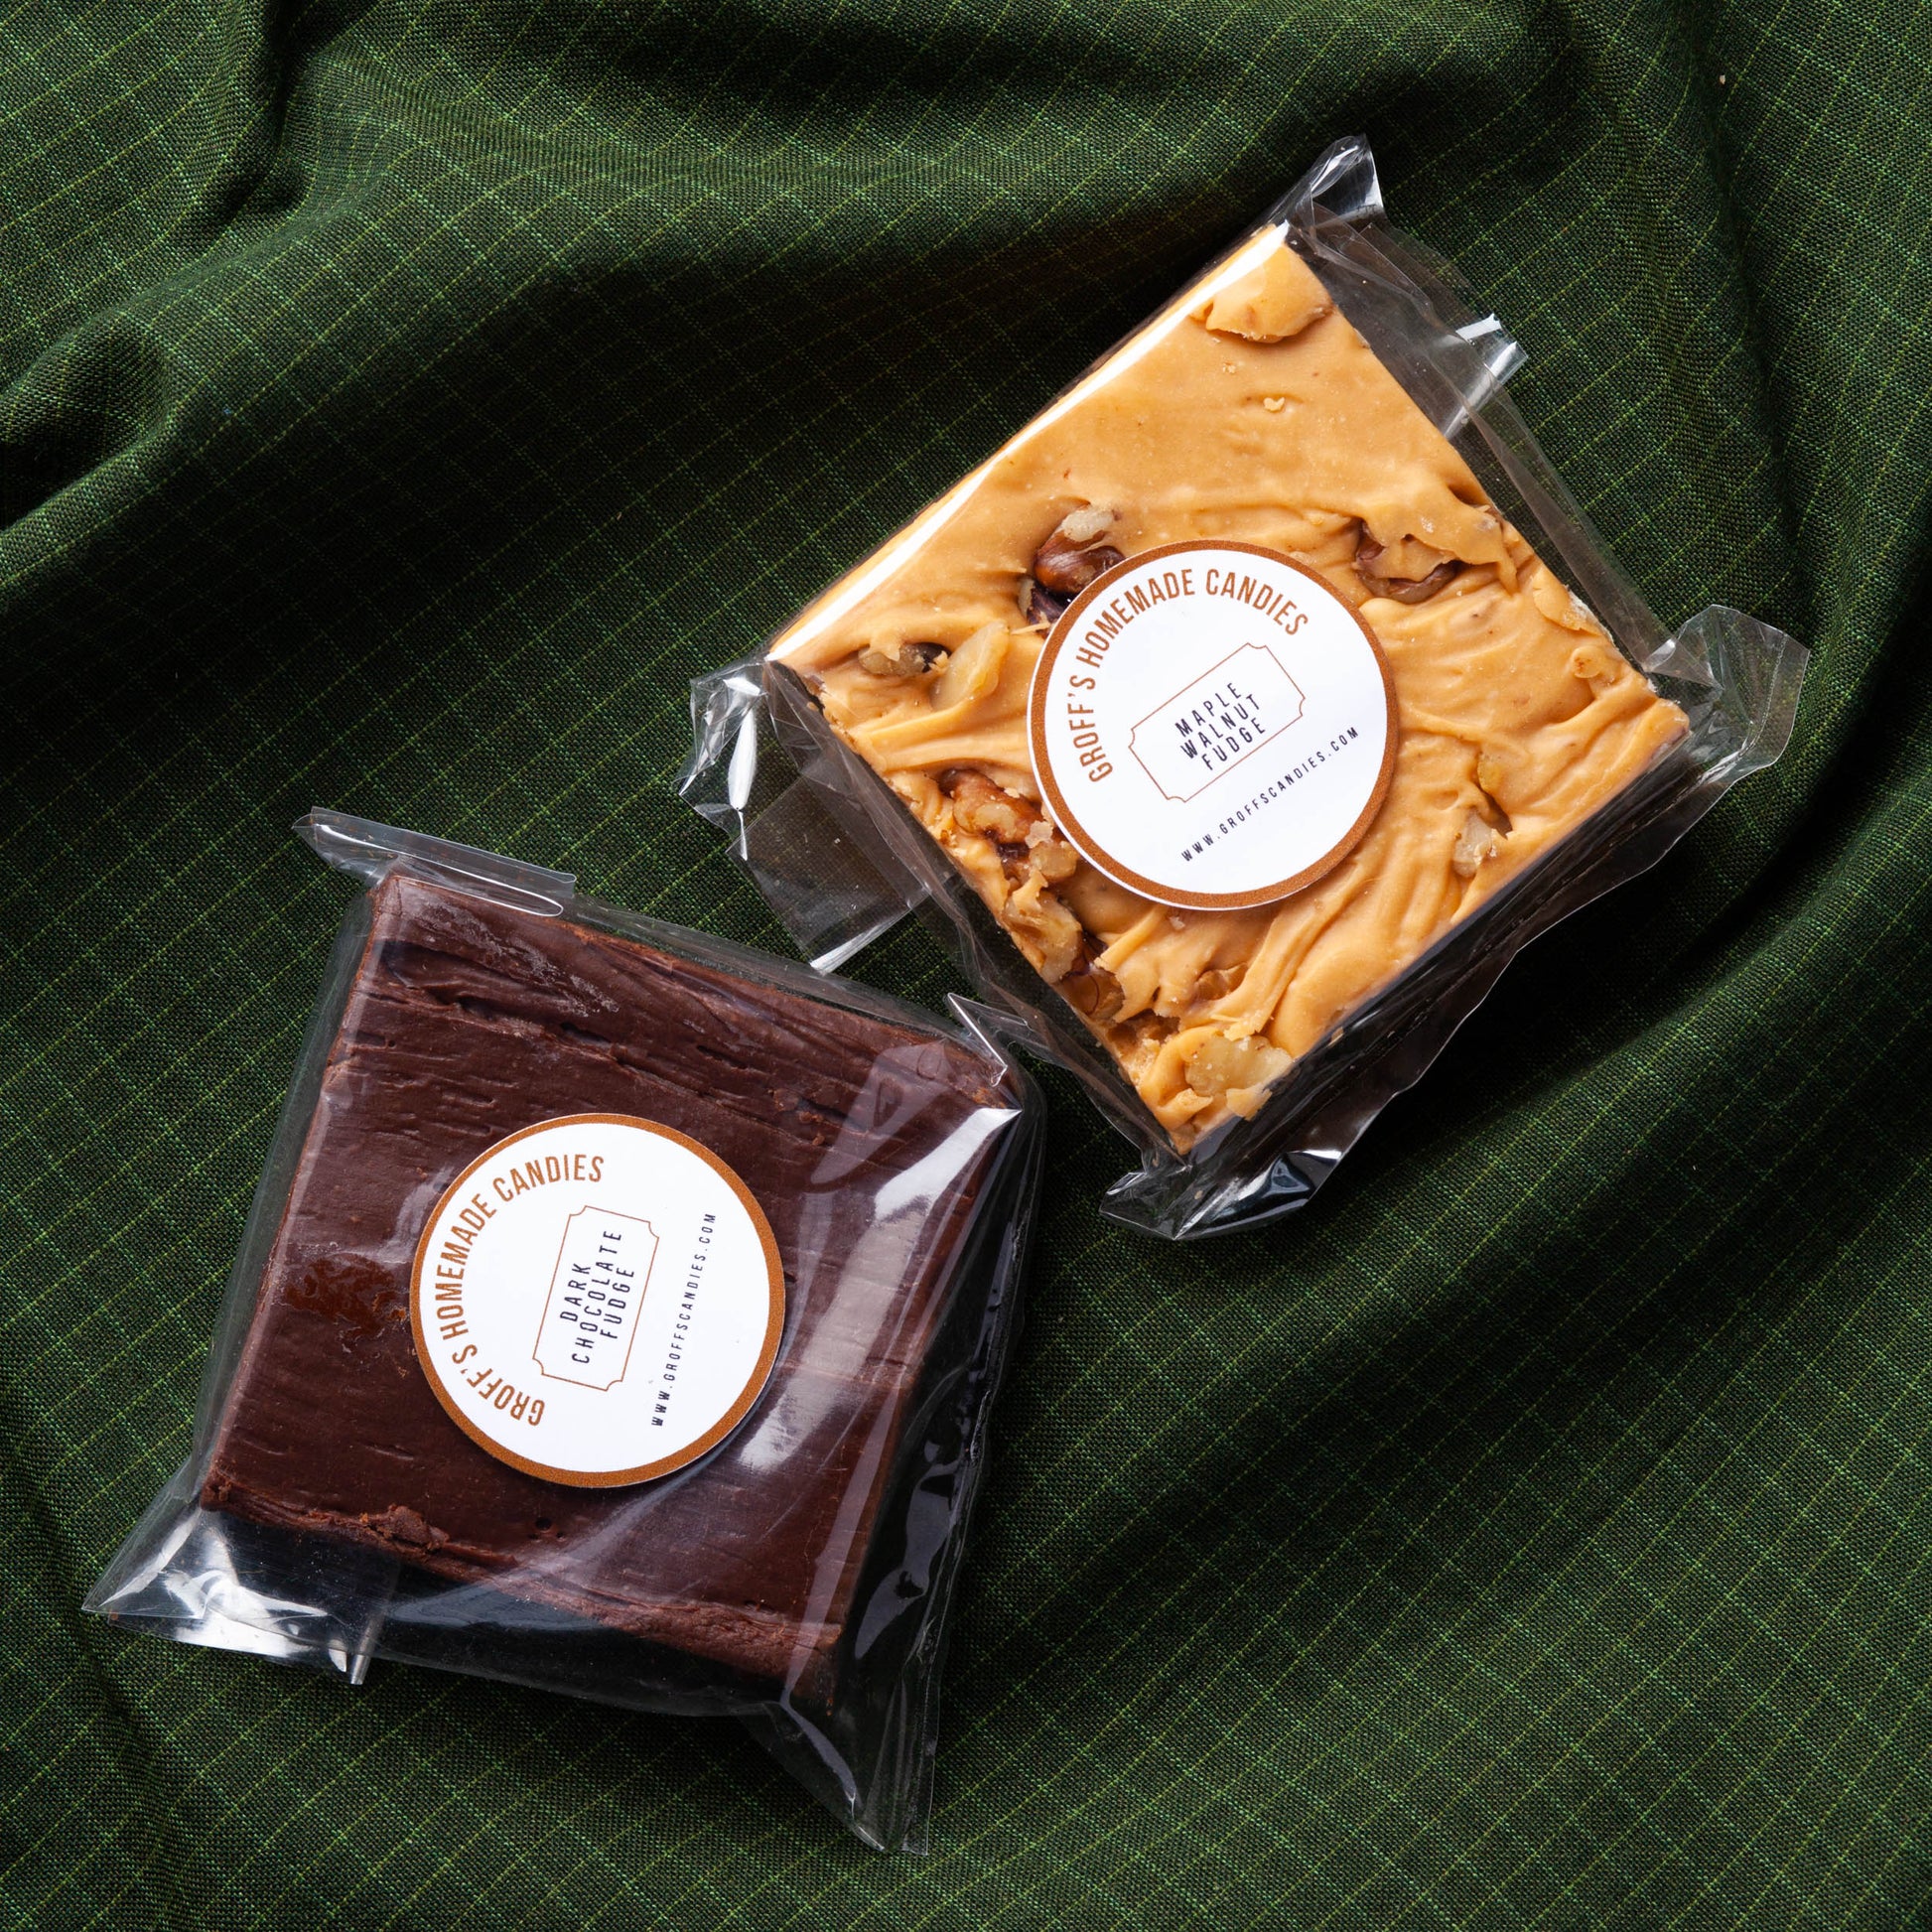 Fudge Squares from Groff's Candies